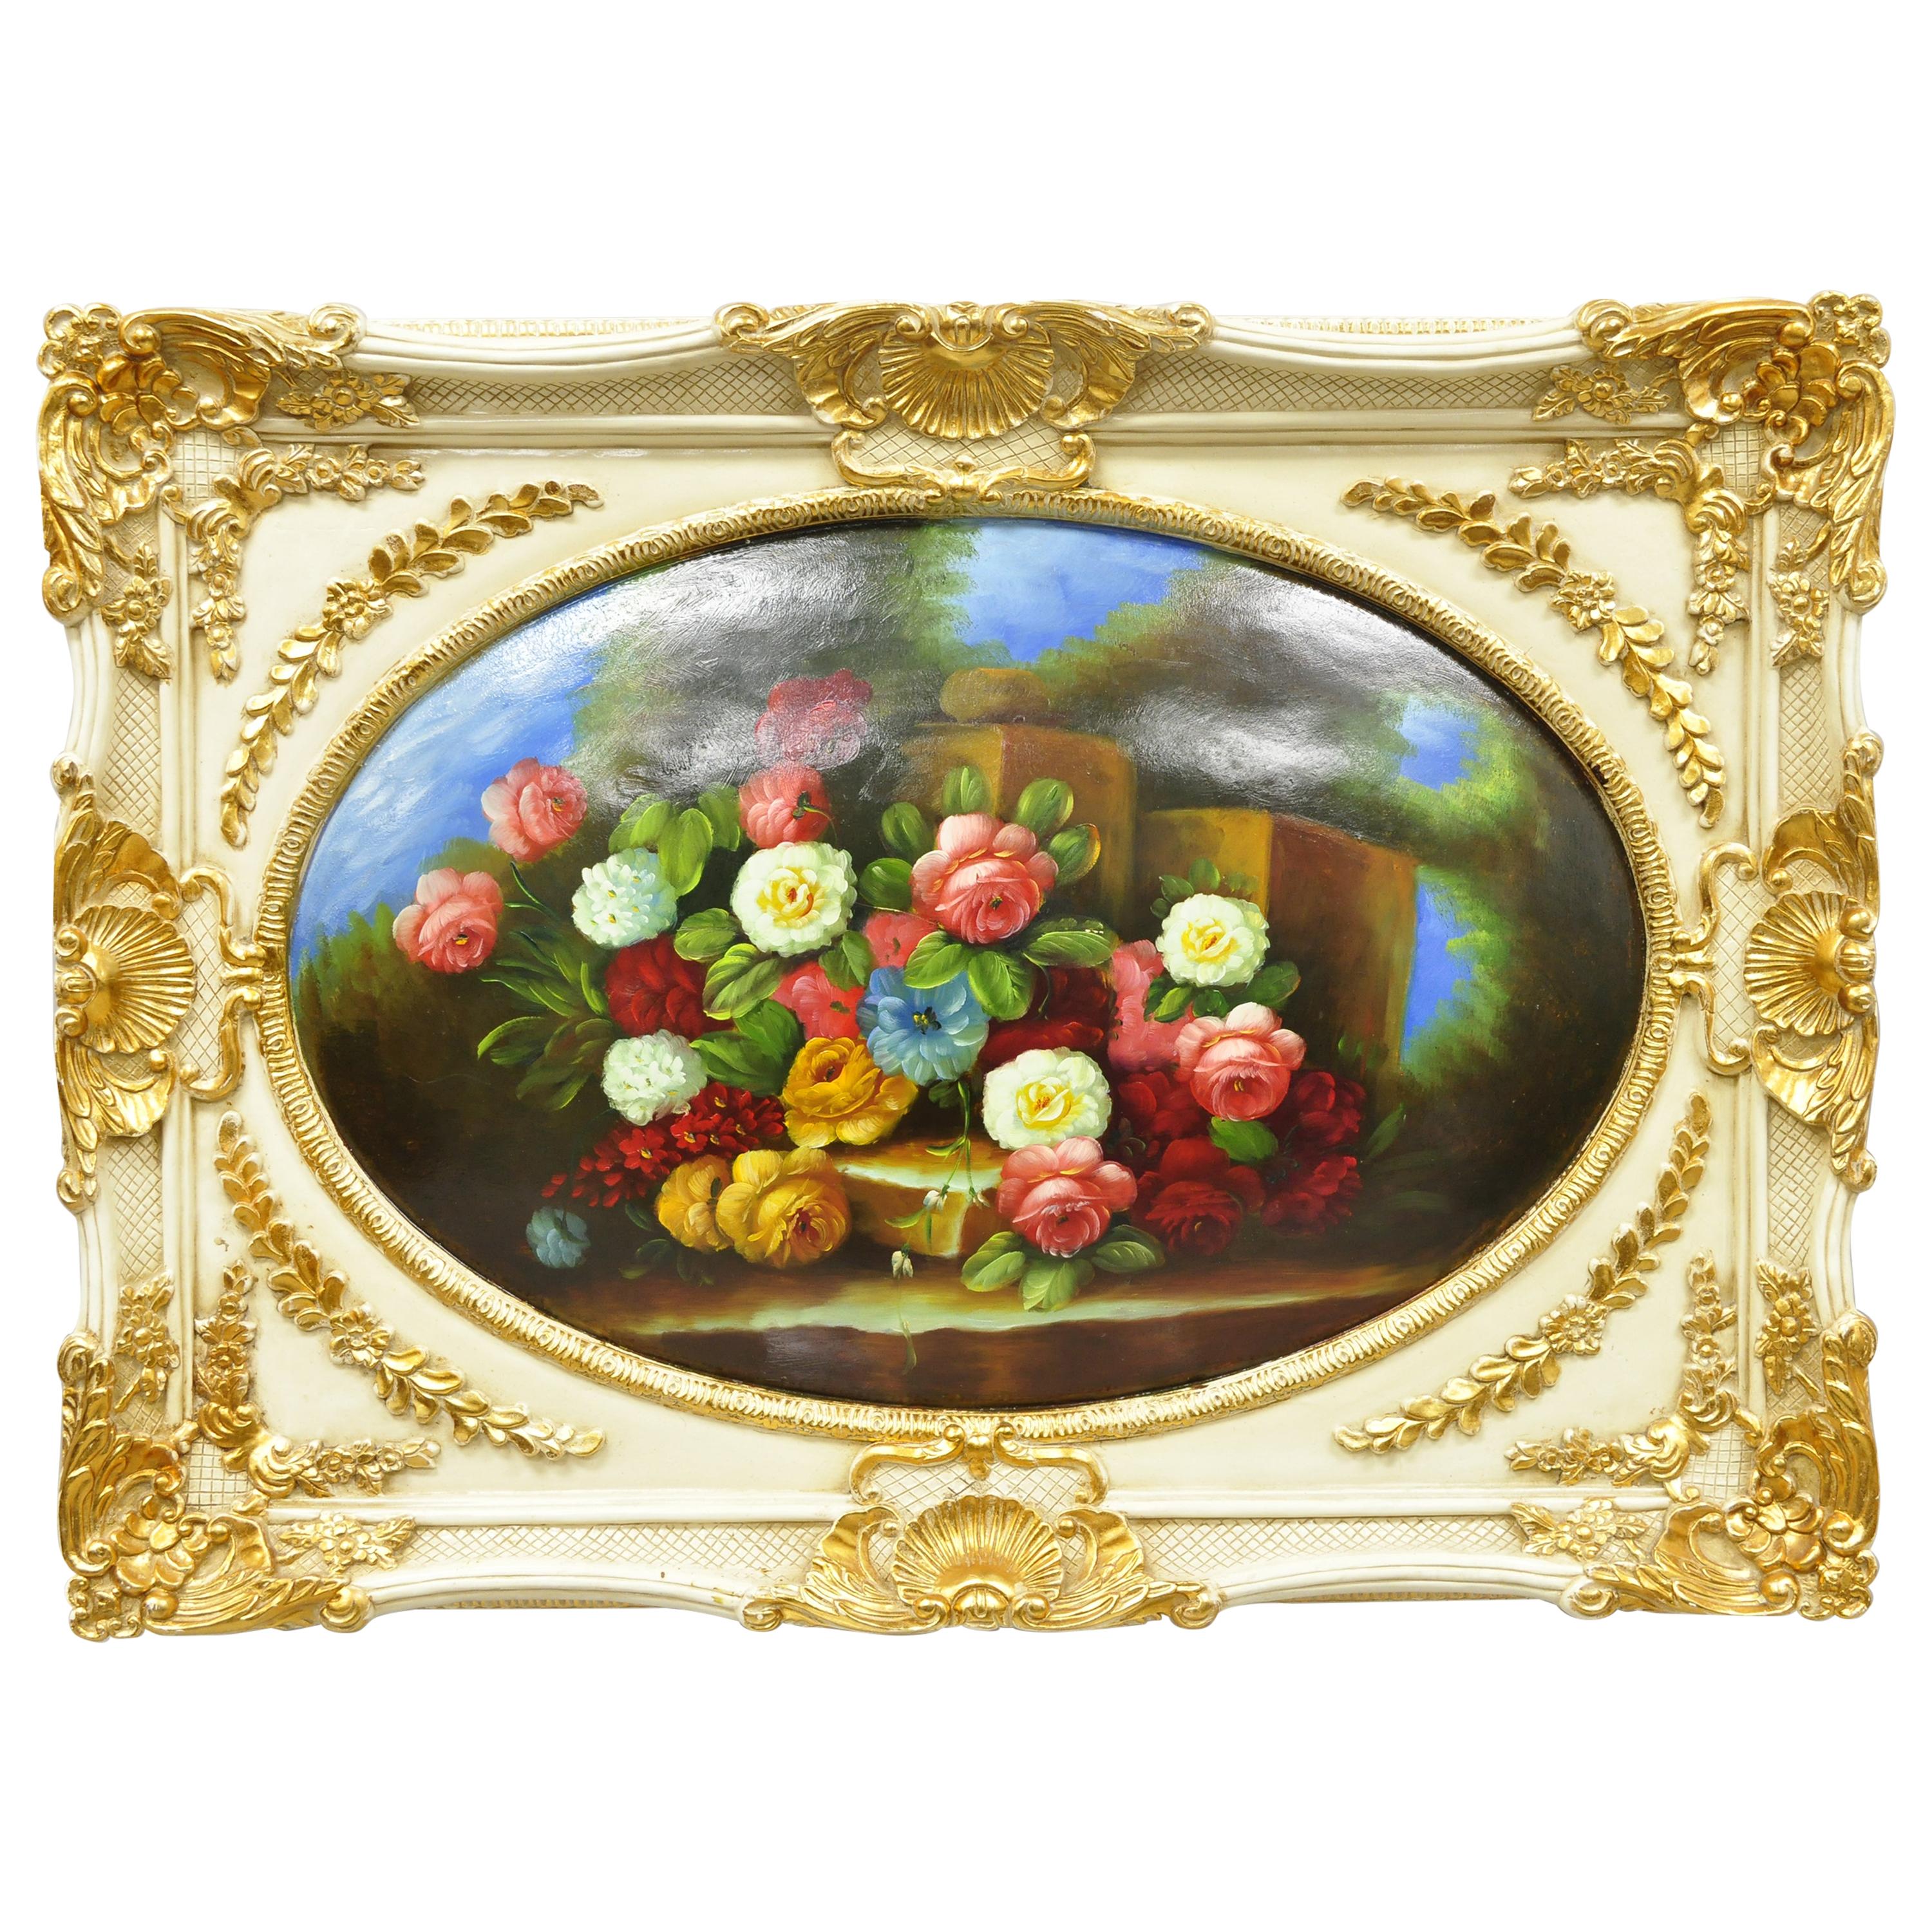 Vintage Italian Rococo Flower Still Life Wall Art Painting by Mirtex Trading For Sale